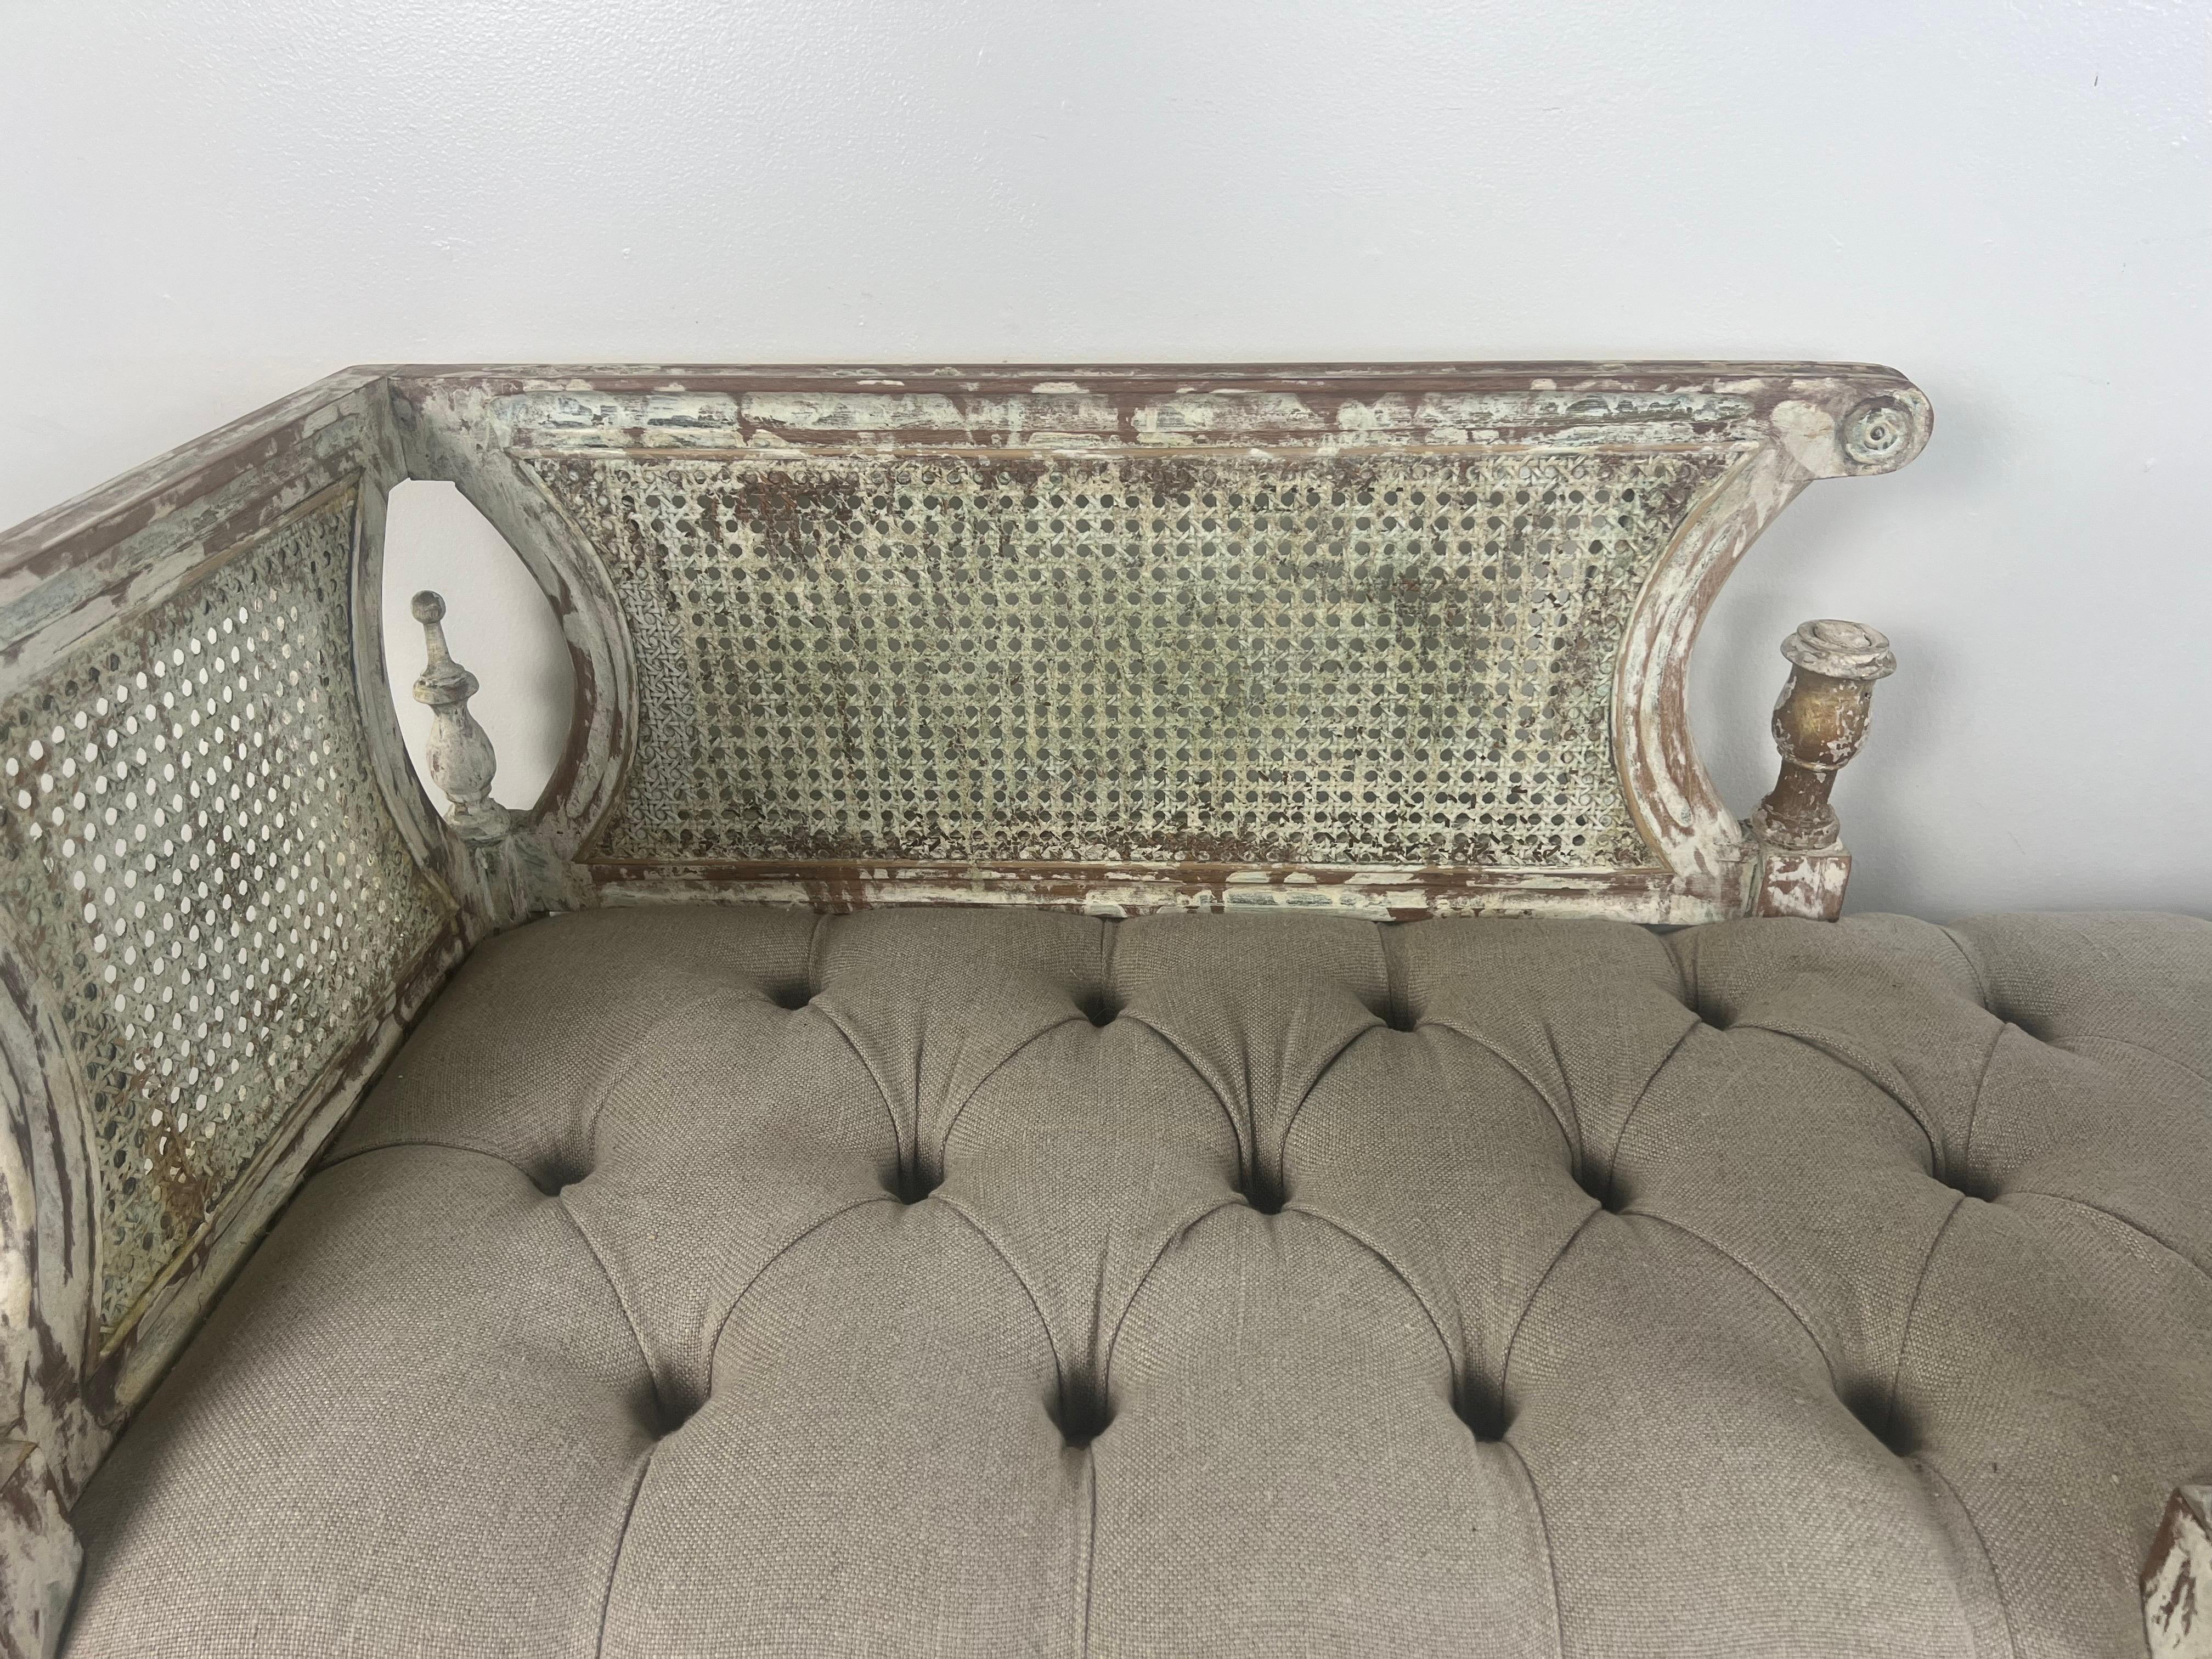 19th Century 19th C. French Louis XVI Style Double Seat Bench